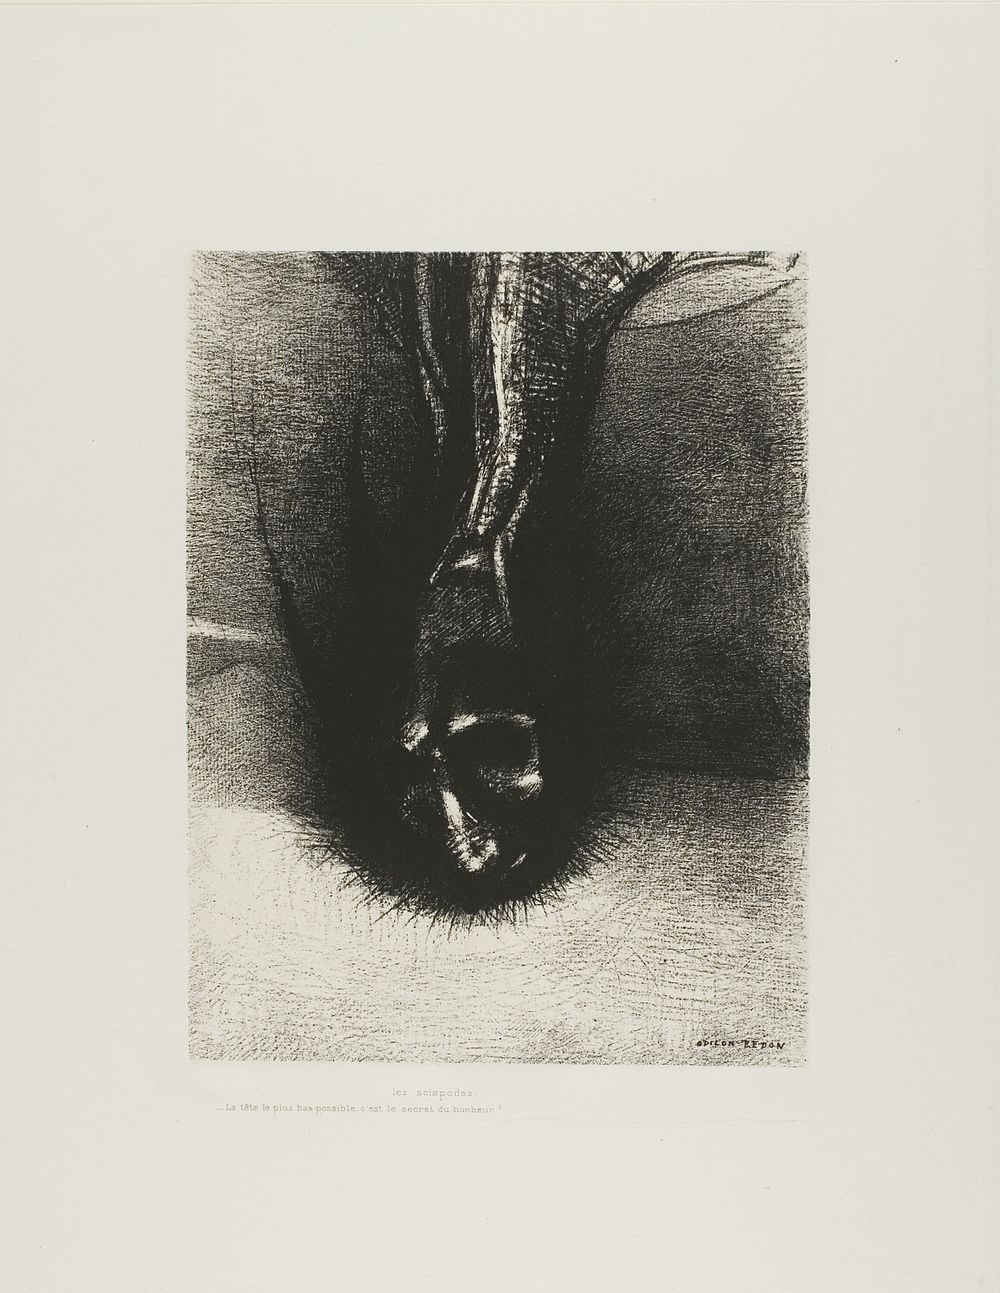 The Skiapods: "The head as low as possible, that is the secret of happiness!", plate 6 of 6 by Odilon Redon